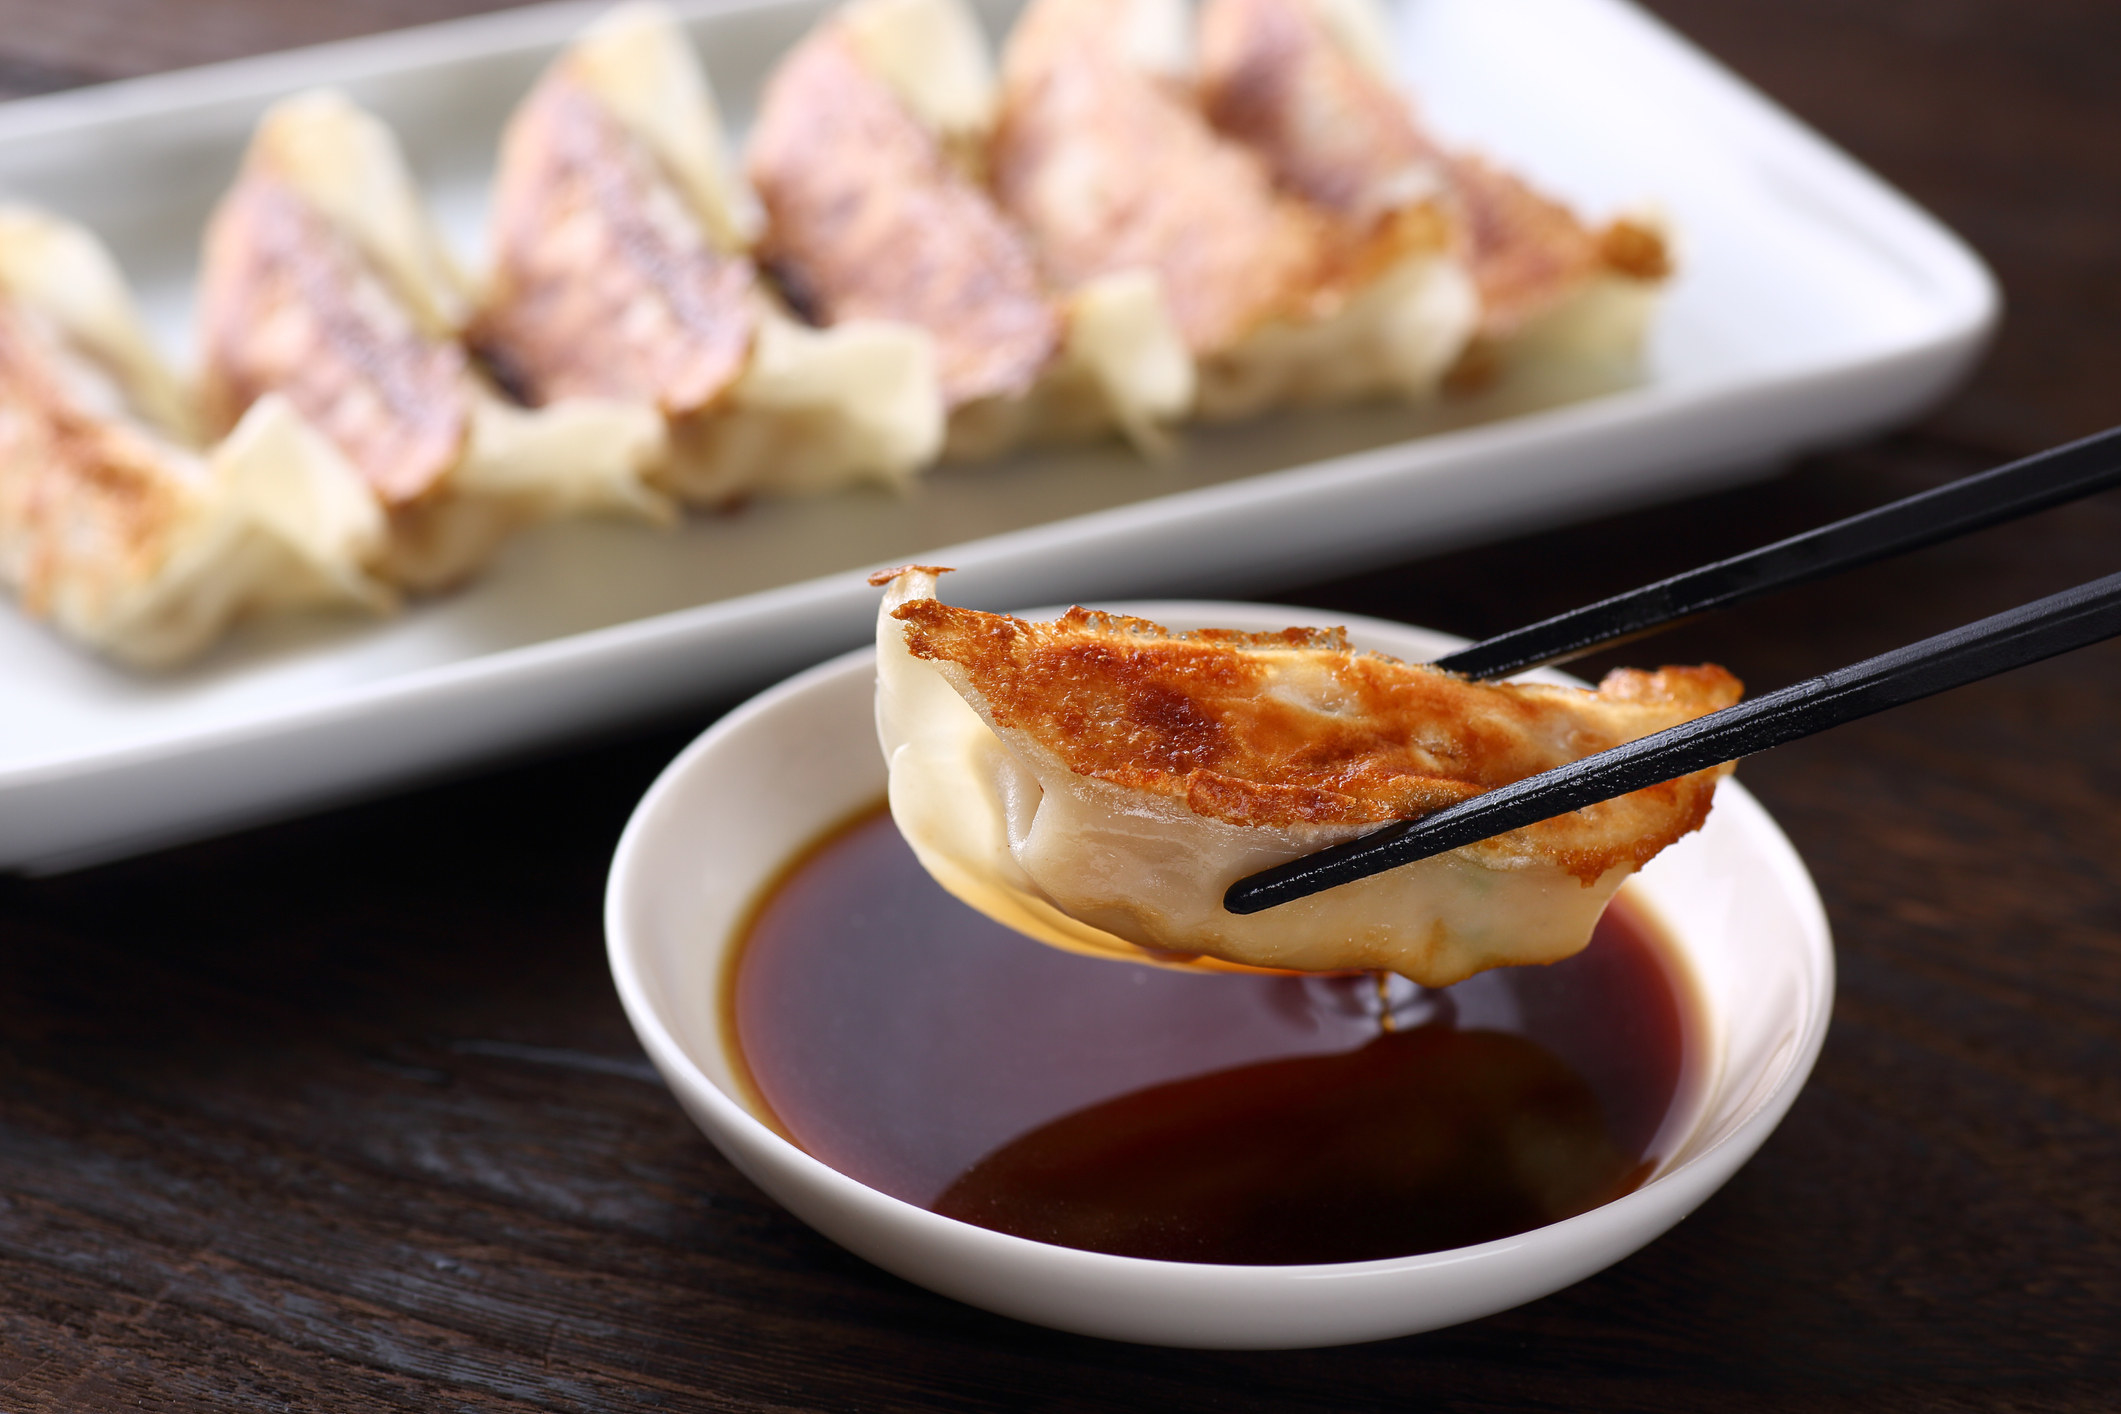 Someone dipping a gyoza into soy sauce.